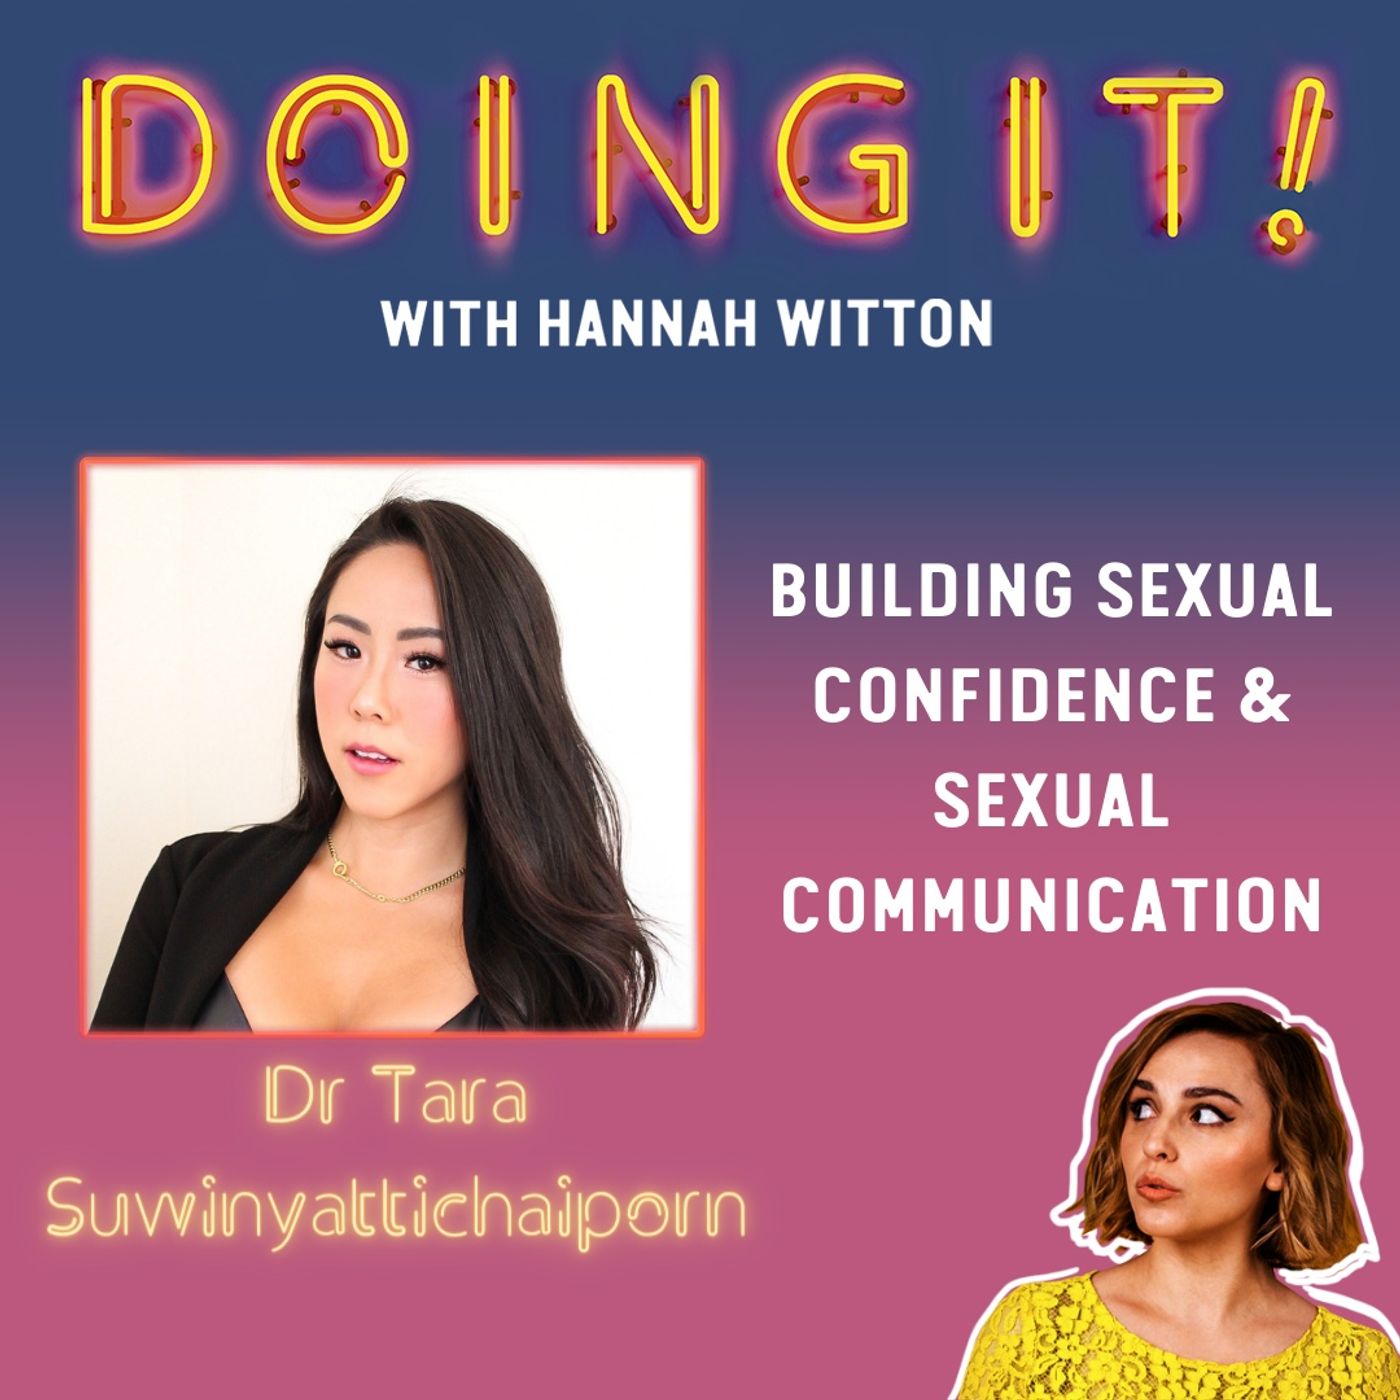 Building Sexual Confidence and Sexual Communication with Dr Tara Suwinyattichaiporn